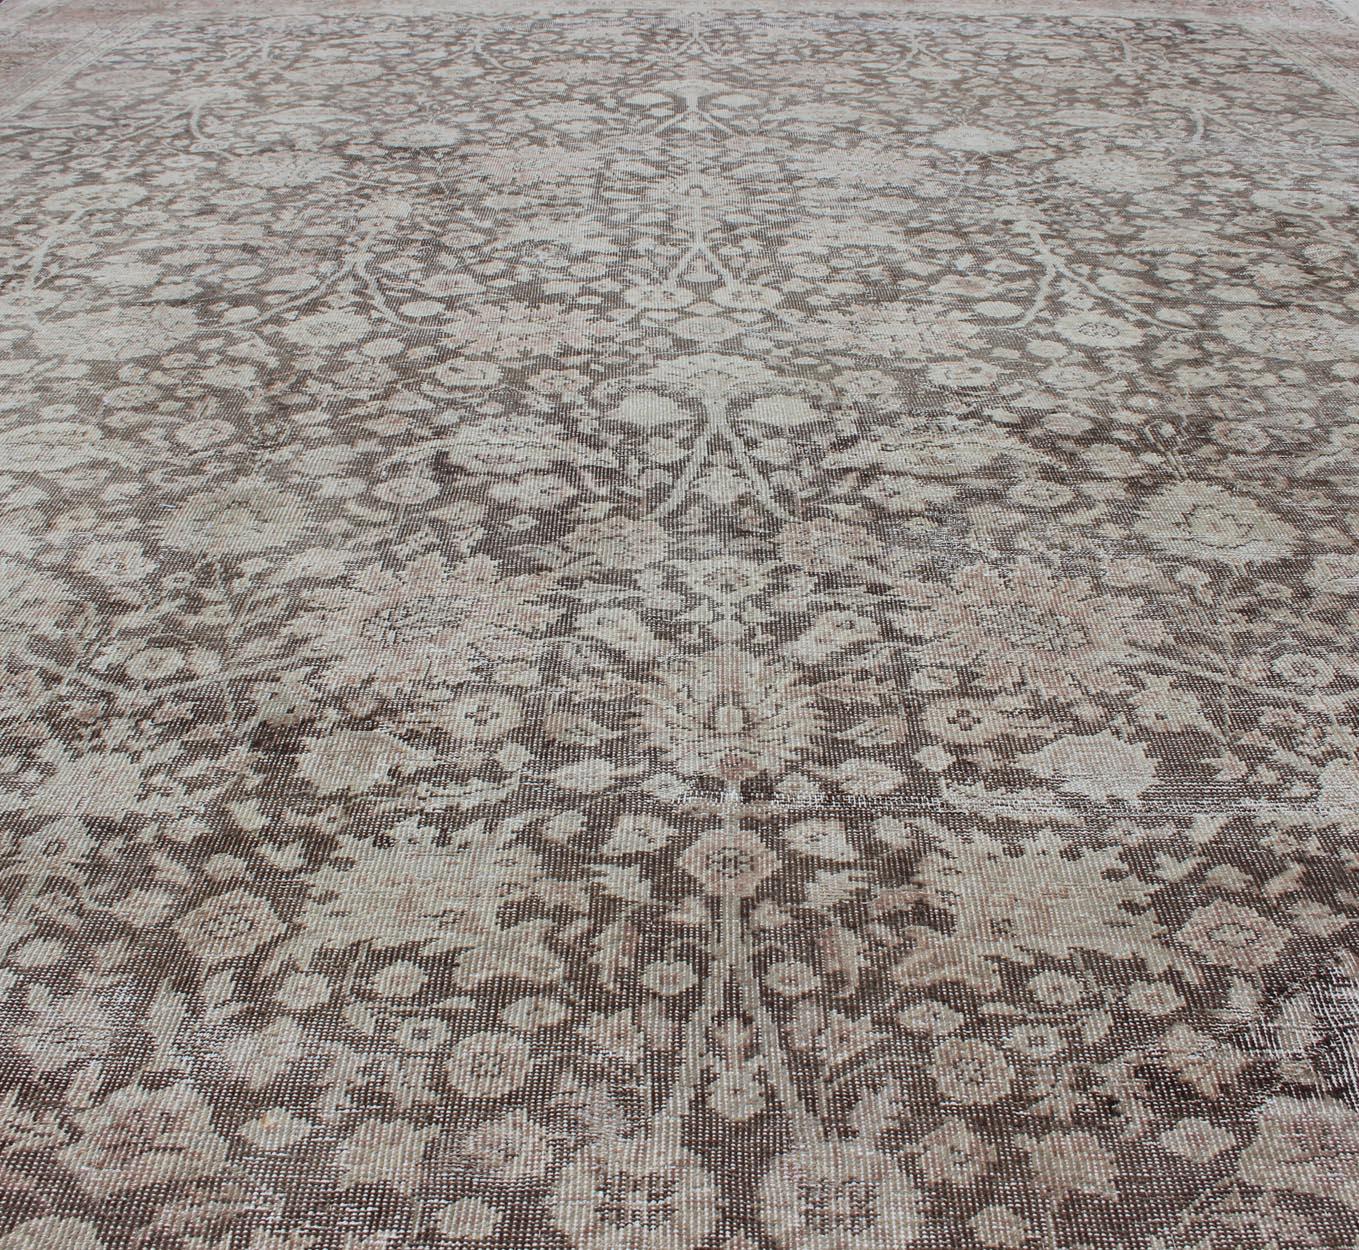 Antique Turkish Oushak Rug with All-Over Floral Design in Earth Tones For Sale 2